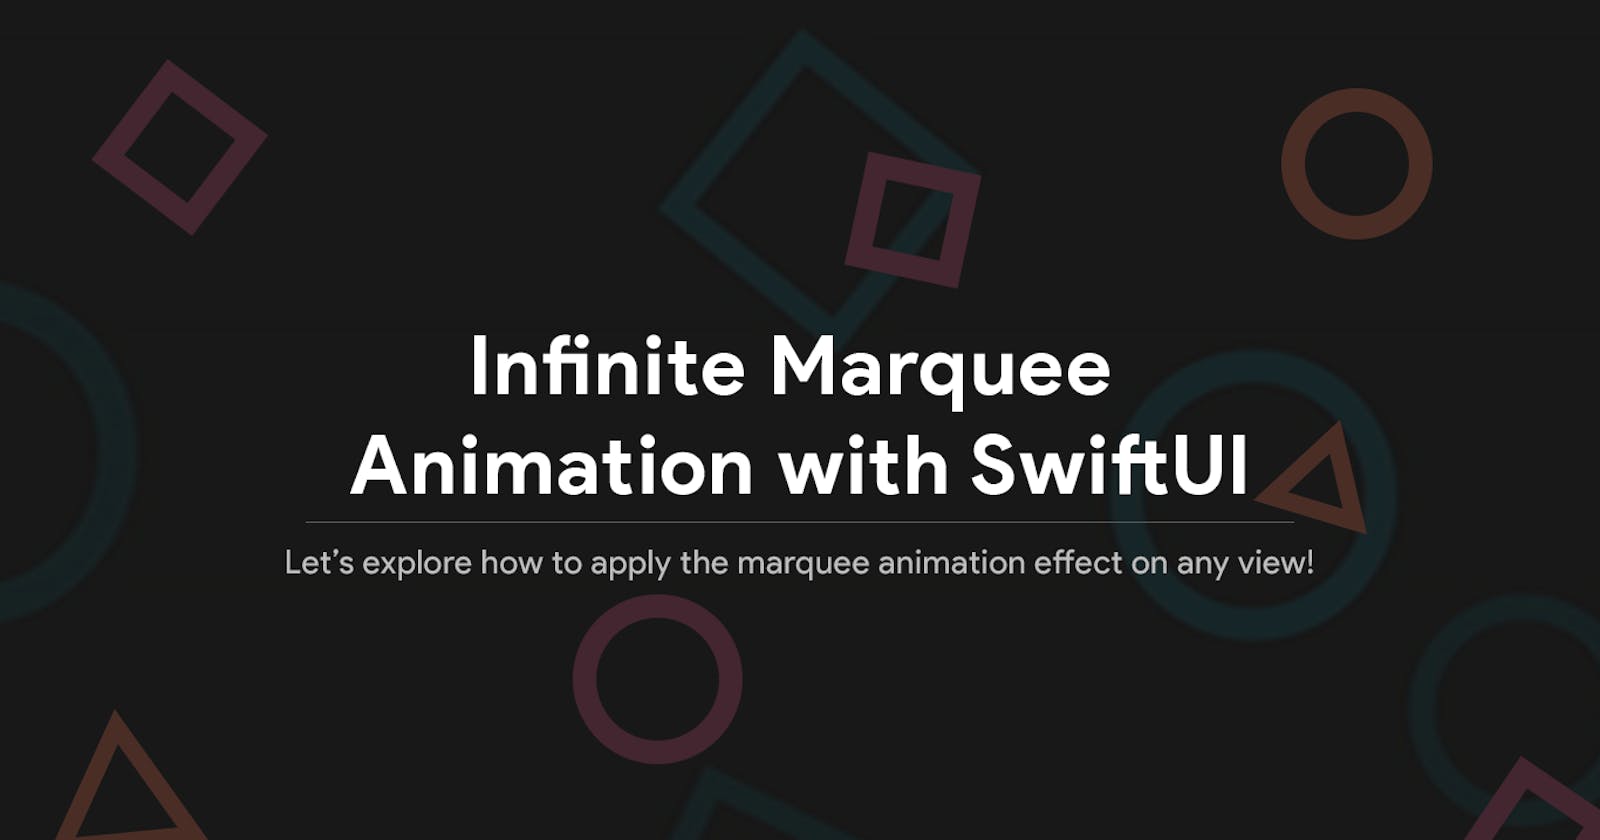 iOS — Infinite Marquee Animation with SwiftUI